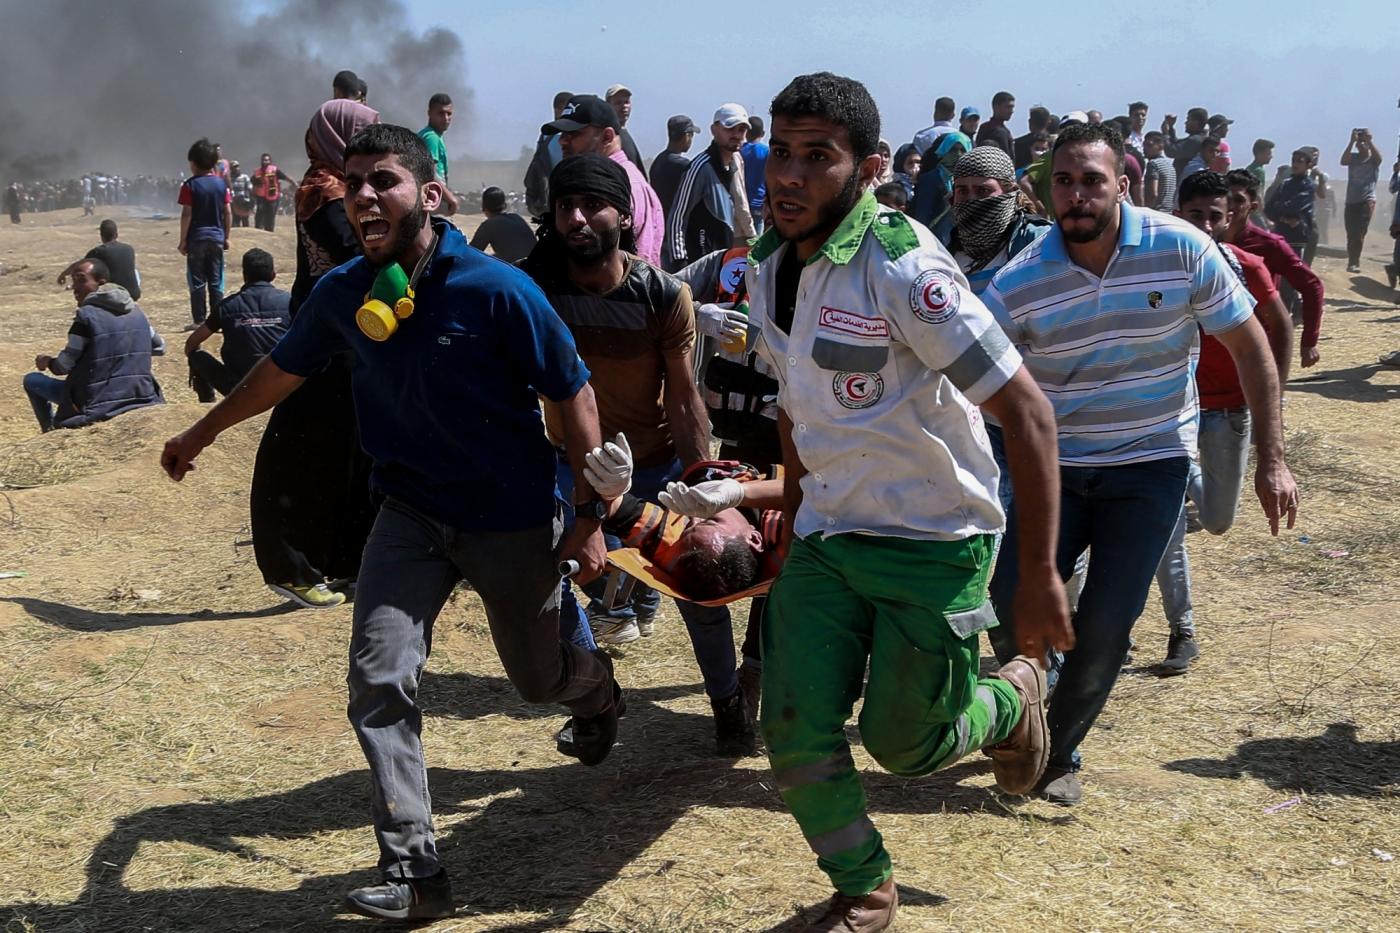 GAZA, May 14, 2018 (Xinhua) -- Palestinian medics and protesters carry an injured man during clashes with Israeli troops near the Gaza-Israel border, east of Gaza City, on May 14, 2018. More than 40 Palestinians, including children, were killed Monday in a day of violent clashes with Israeli forces on Israel's southern border with Gaza, according to the Gaza health ministry. (Xinhua/Wissam Nassar/IANS) by . 